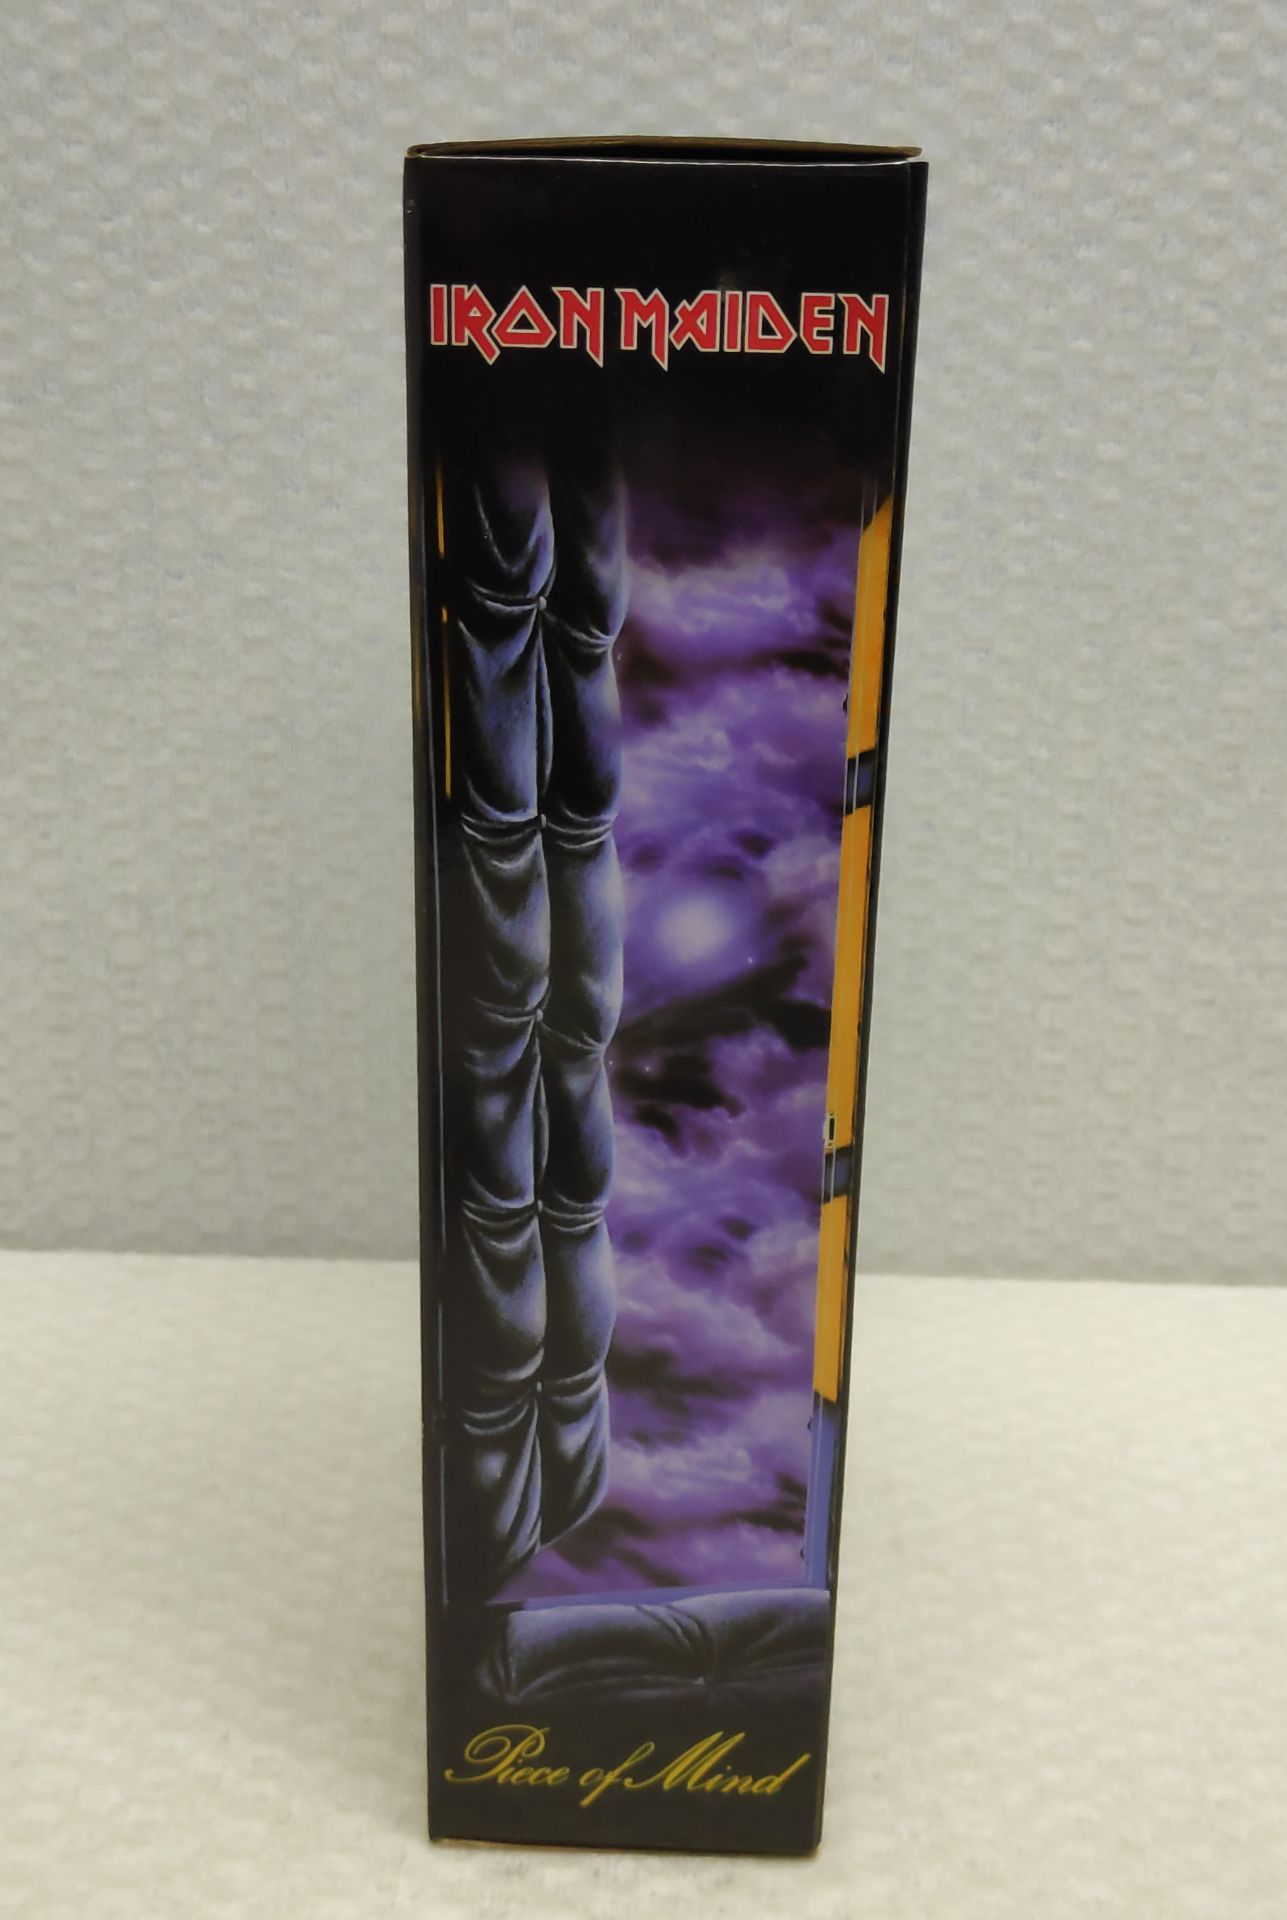 1 x Iron Maiden Eddie Piece of Mind NECA Action Figure - New/Boxed - HTYS166 - CL720 - Location: Alt - Image 2 of 11